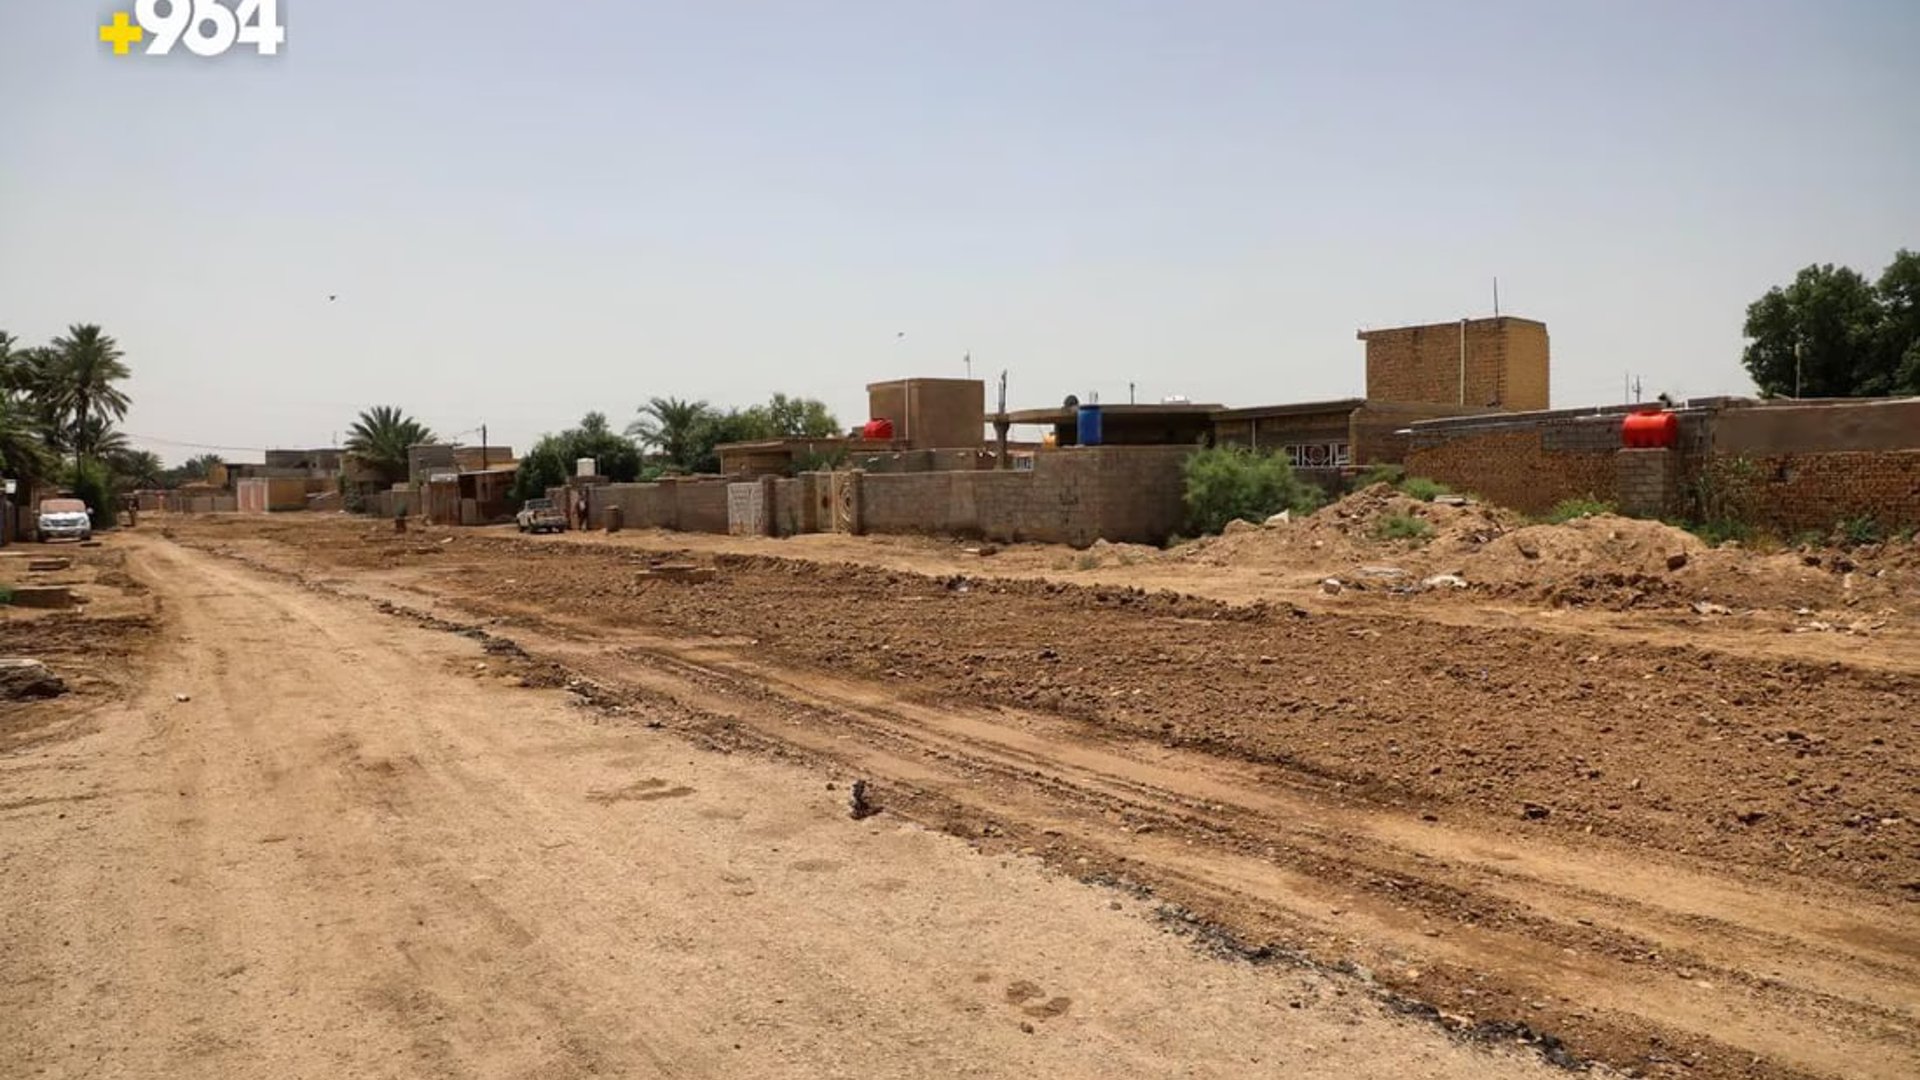 Residents in Kut fear evictions aiming campaign to eliminate illegal housing